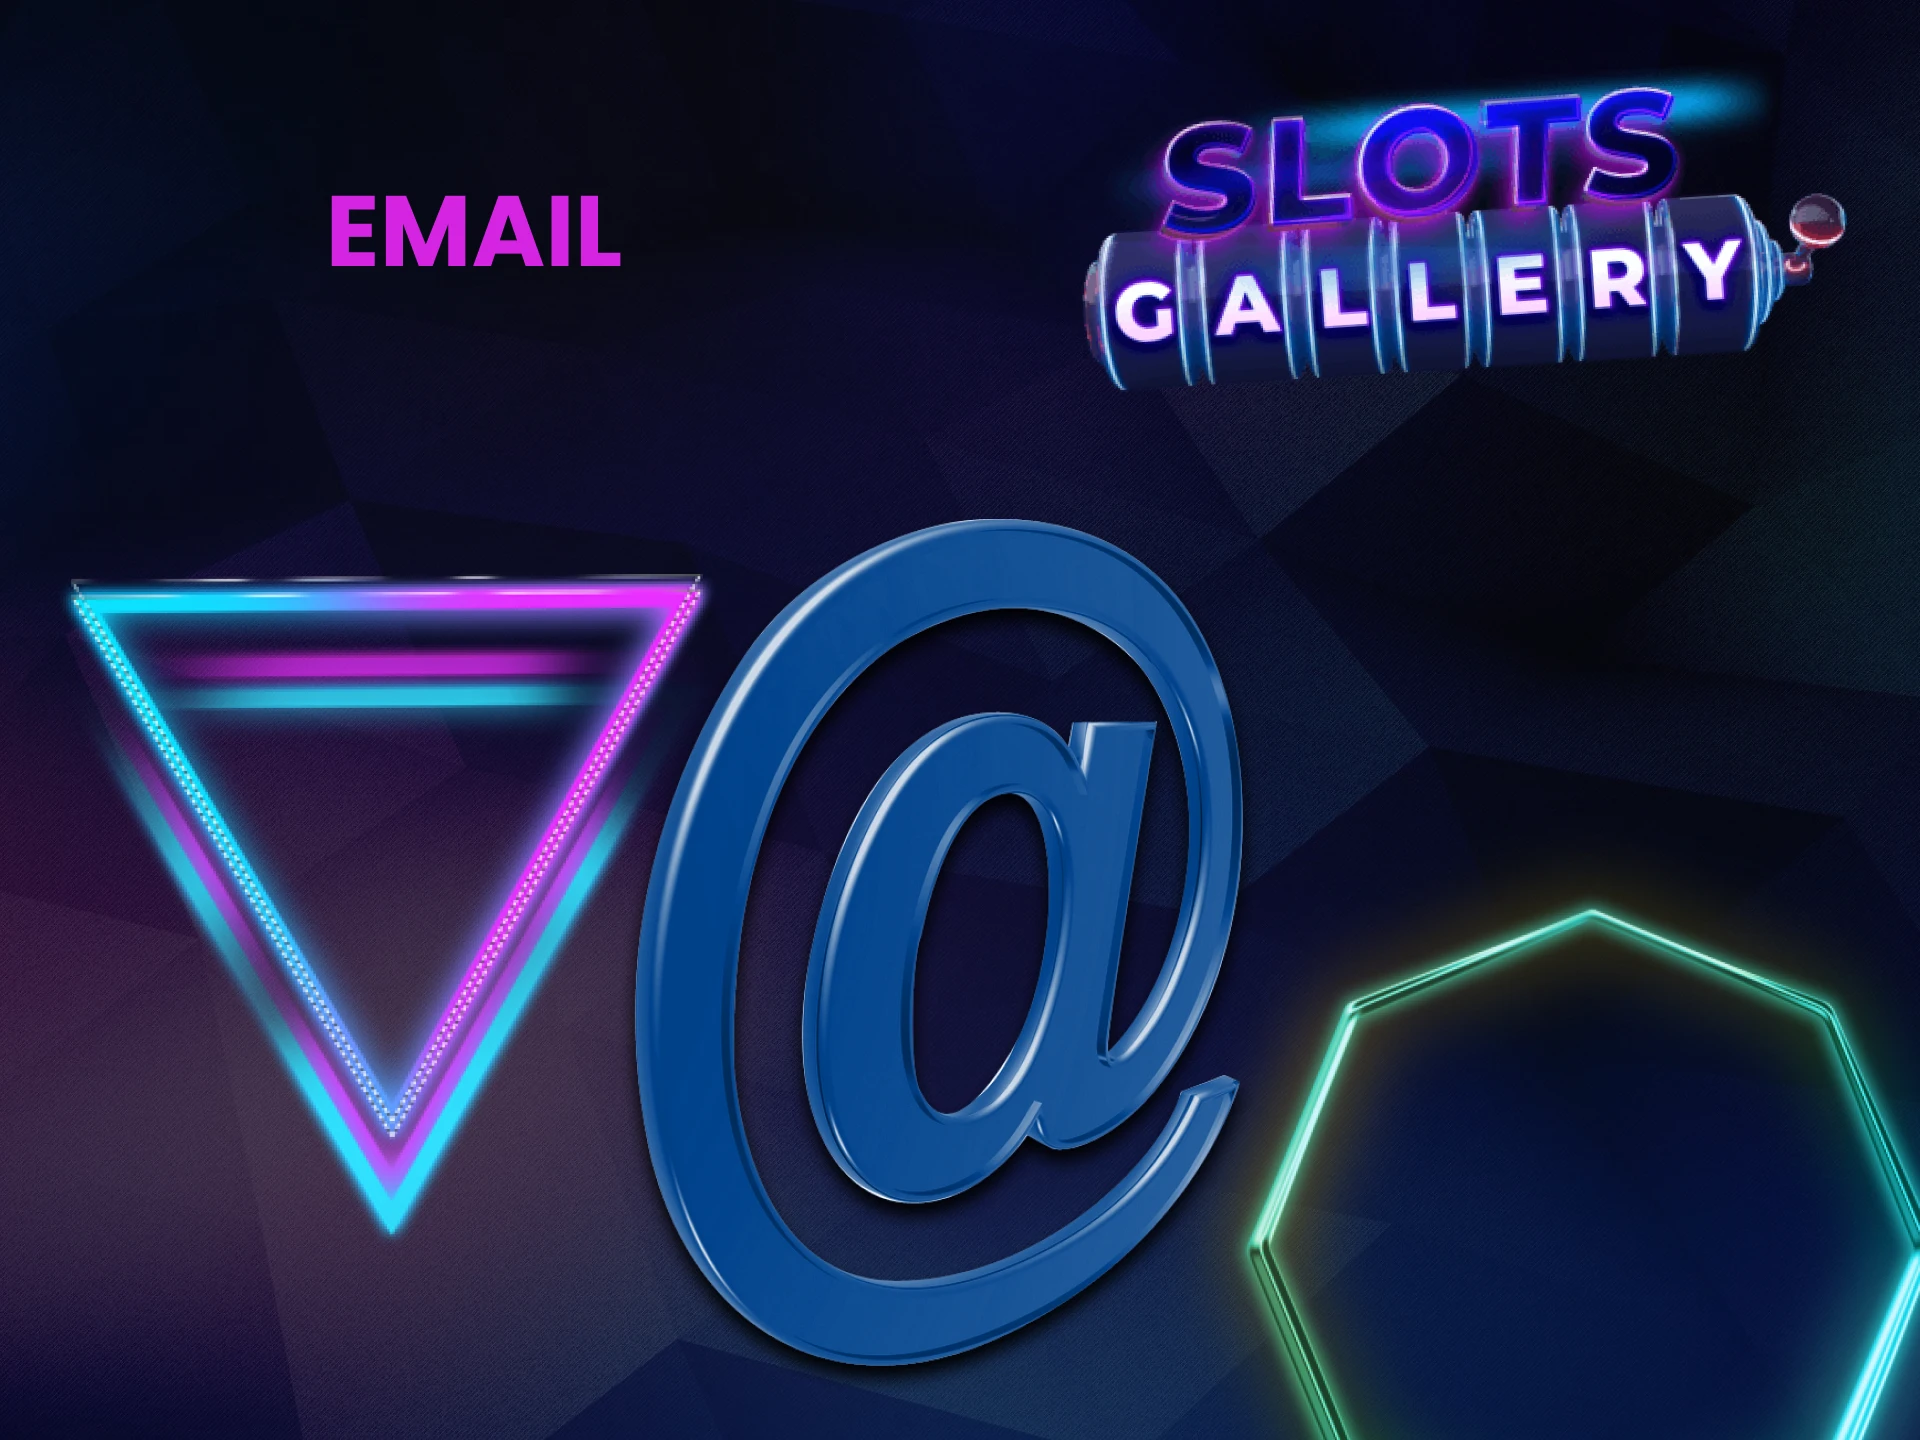 To contact the Slots Gallery team, use email.